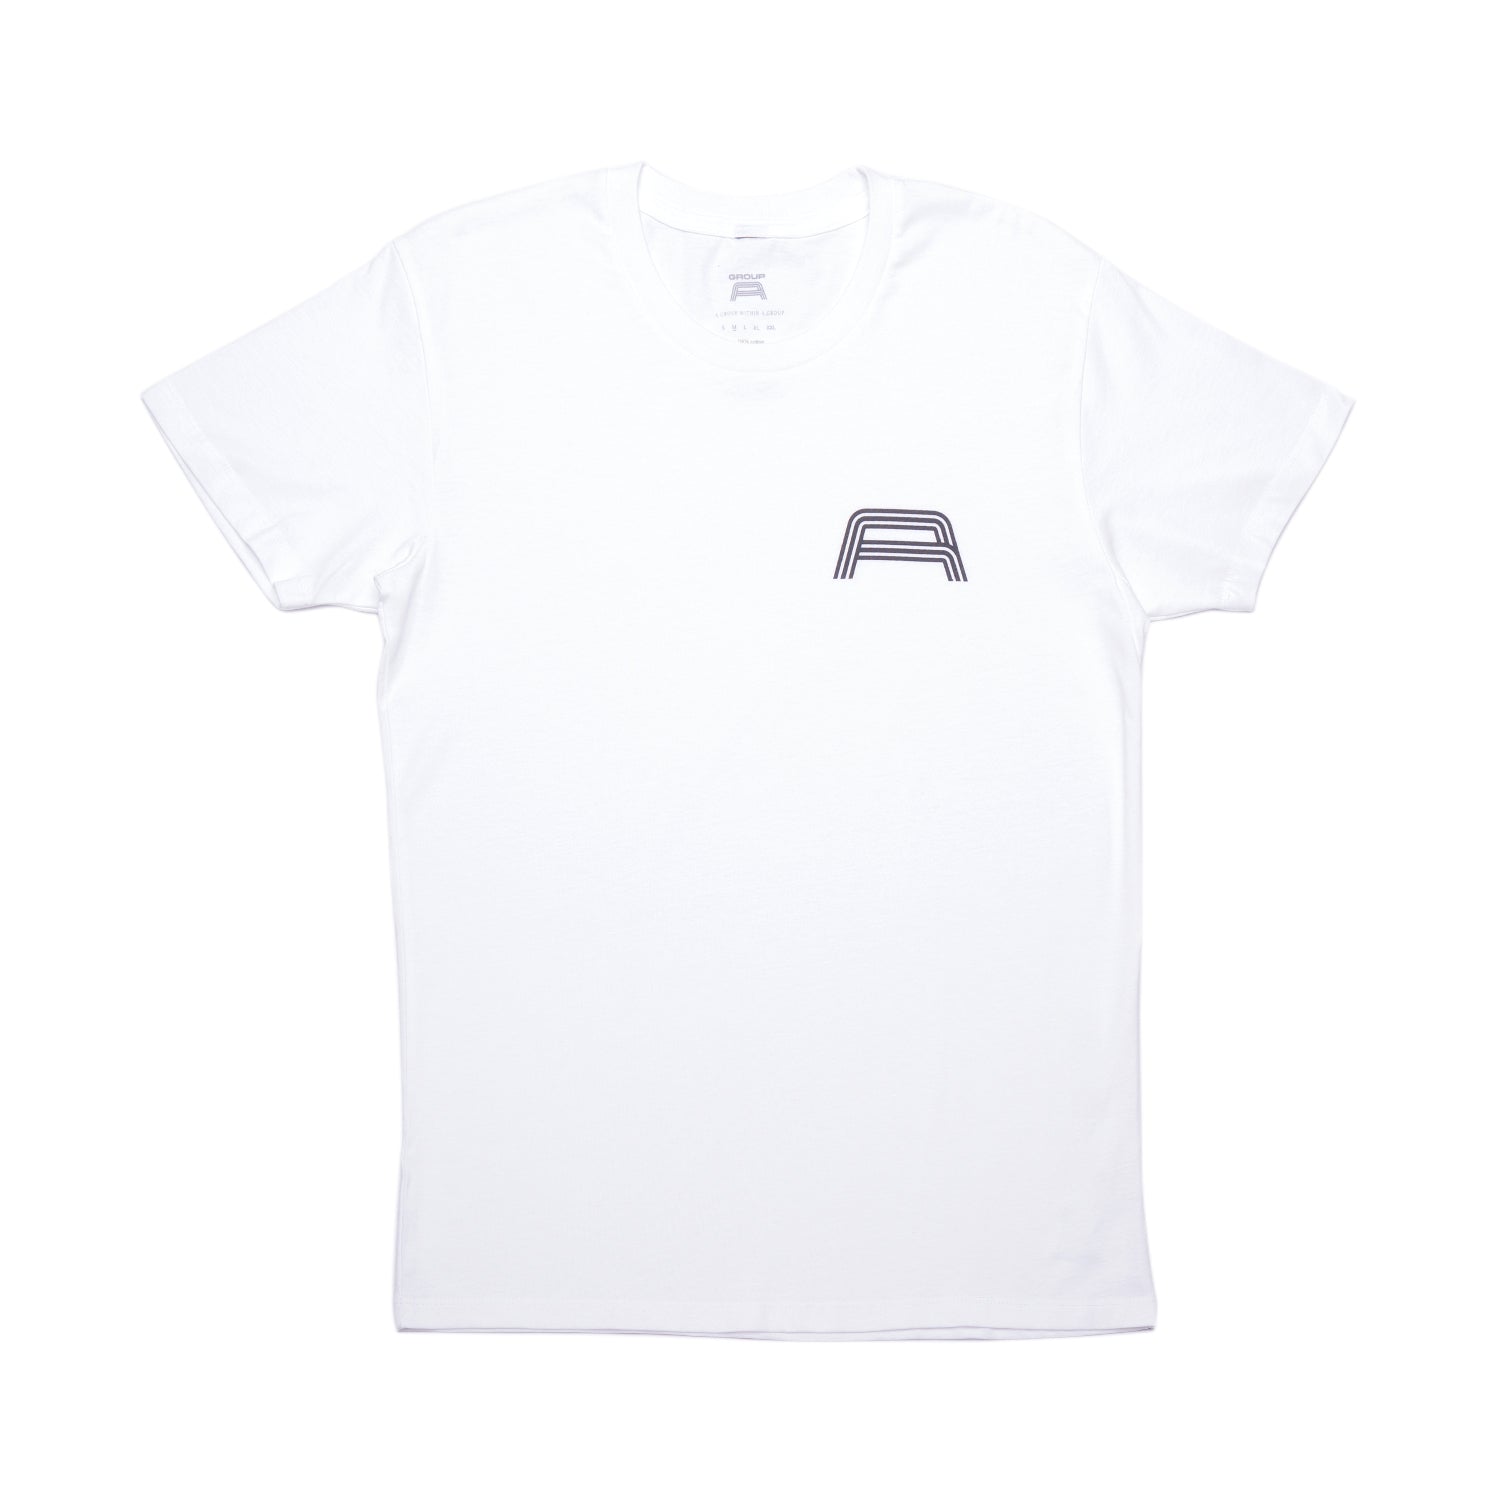 Double Hit tee - White and Black